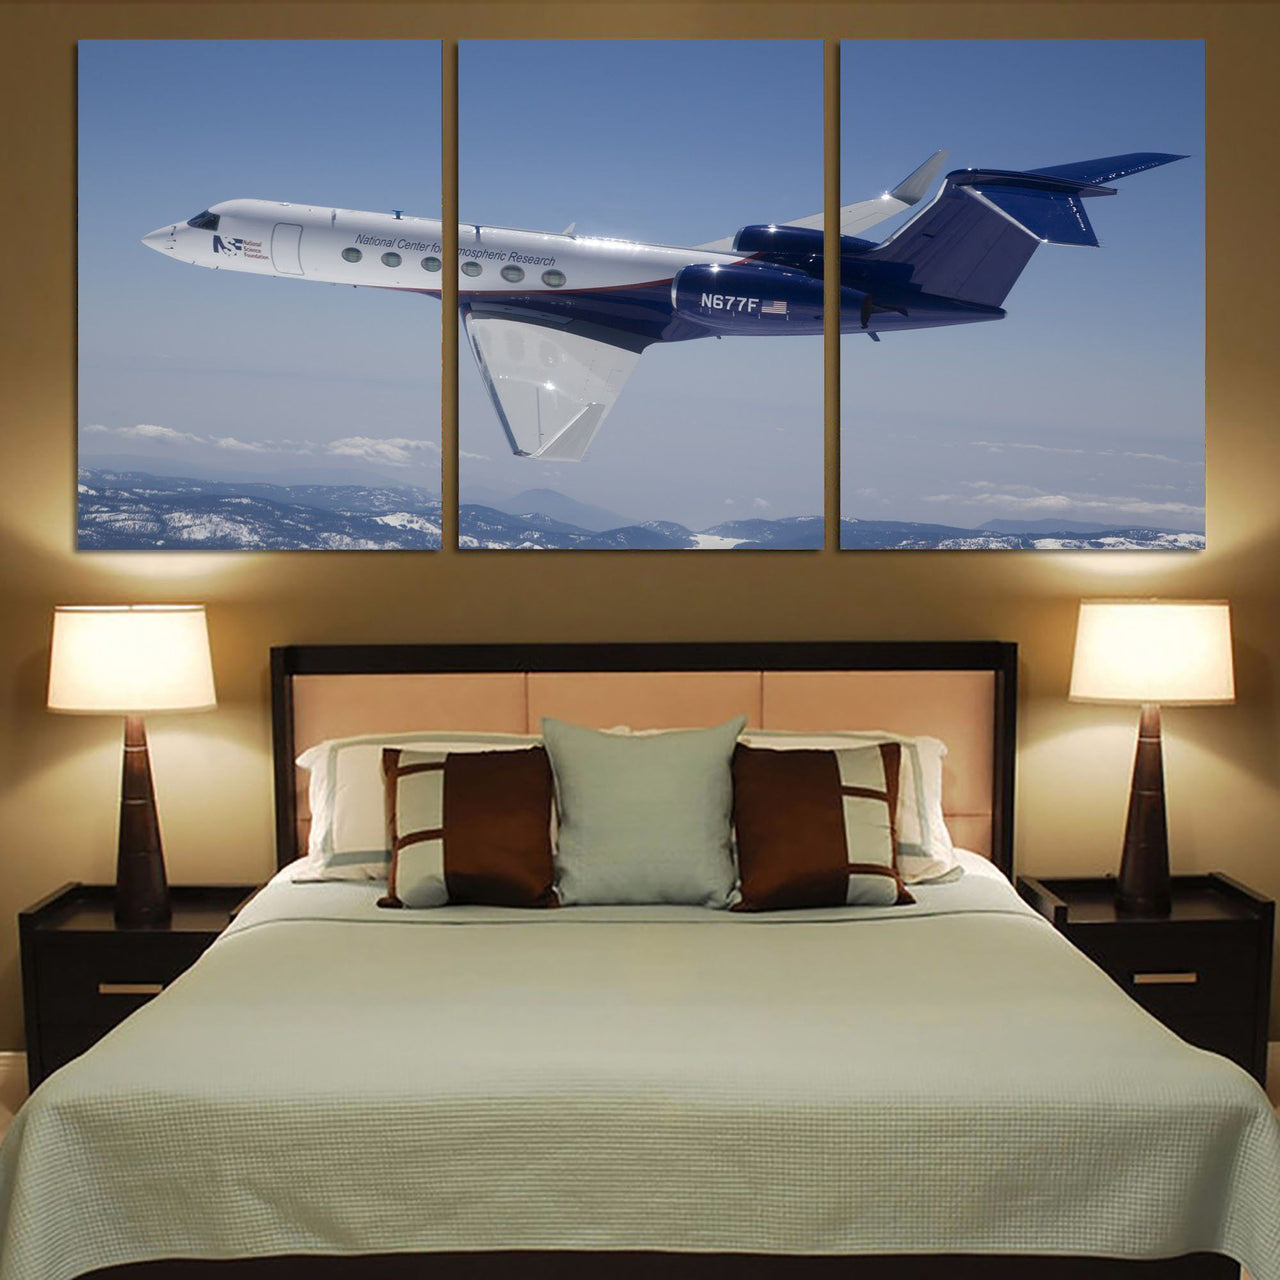 Cruising Gulfstream Jet Printed Canvas Posters (3 Pieces) Aviation Shop 